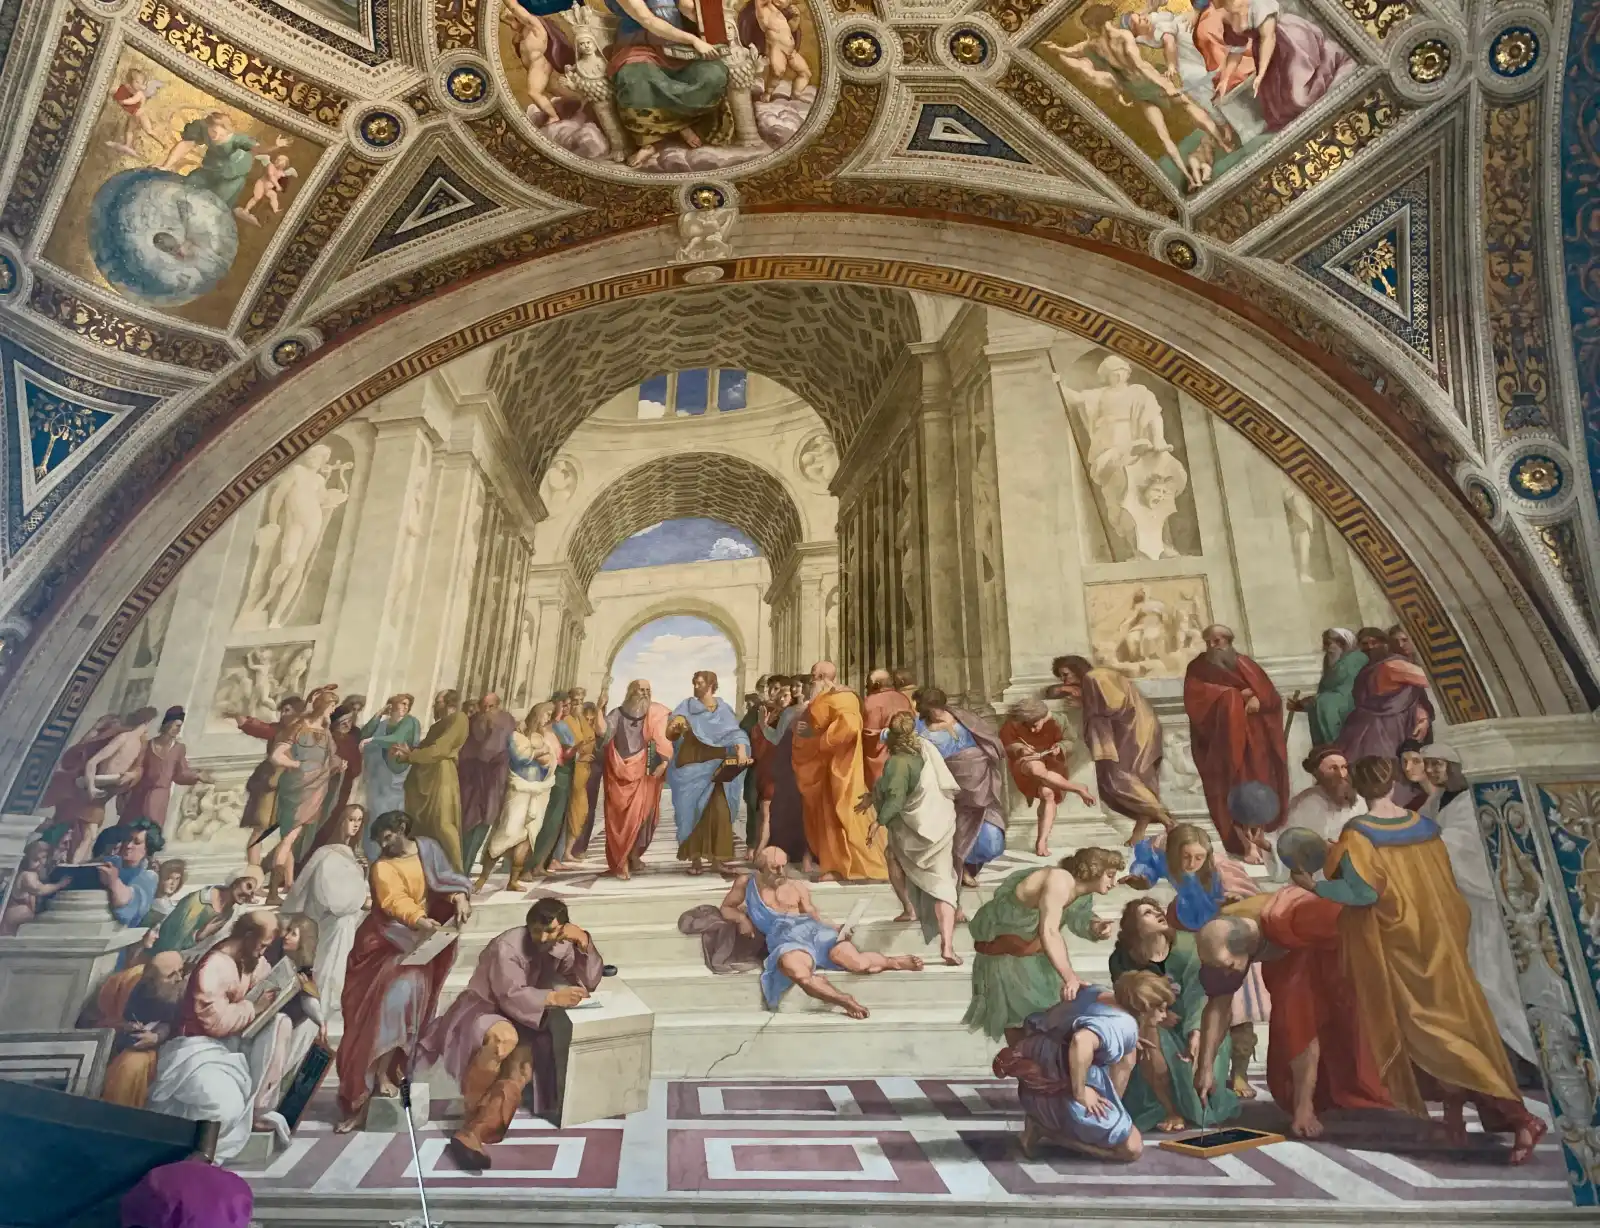 A photo of the School of Athens painting.